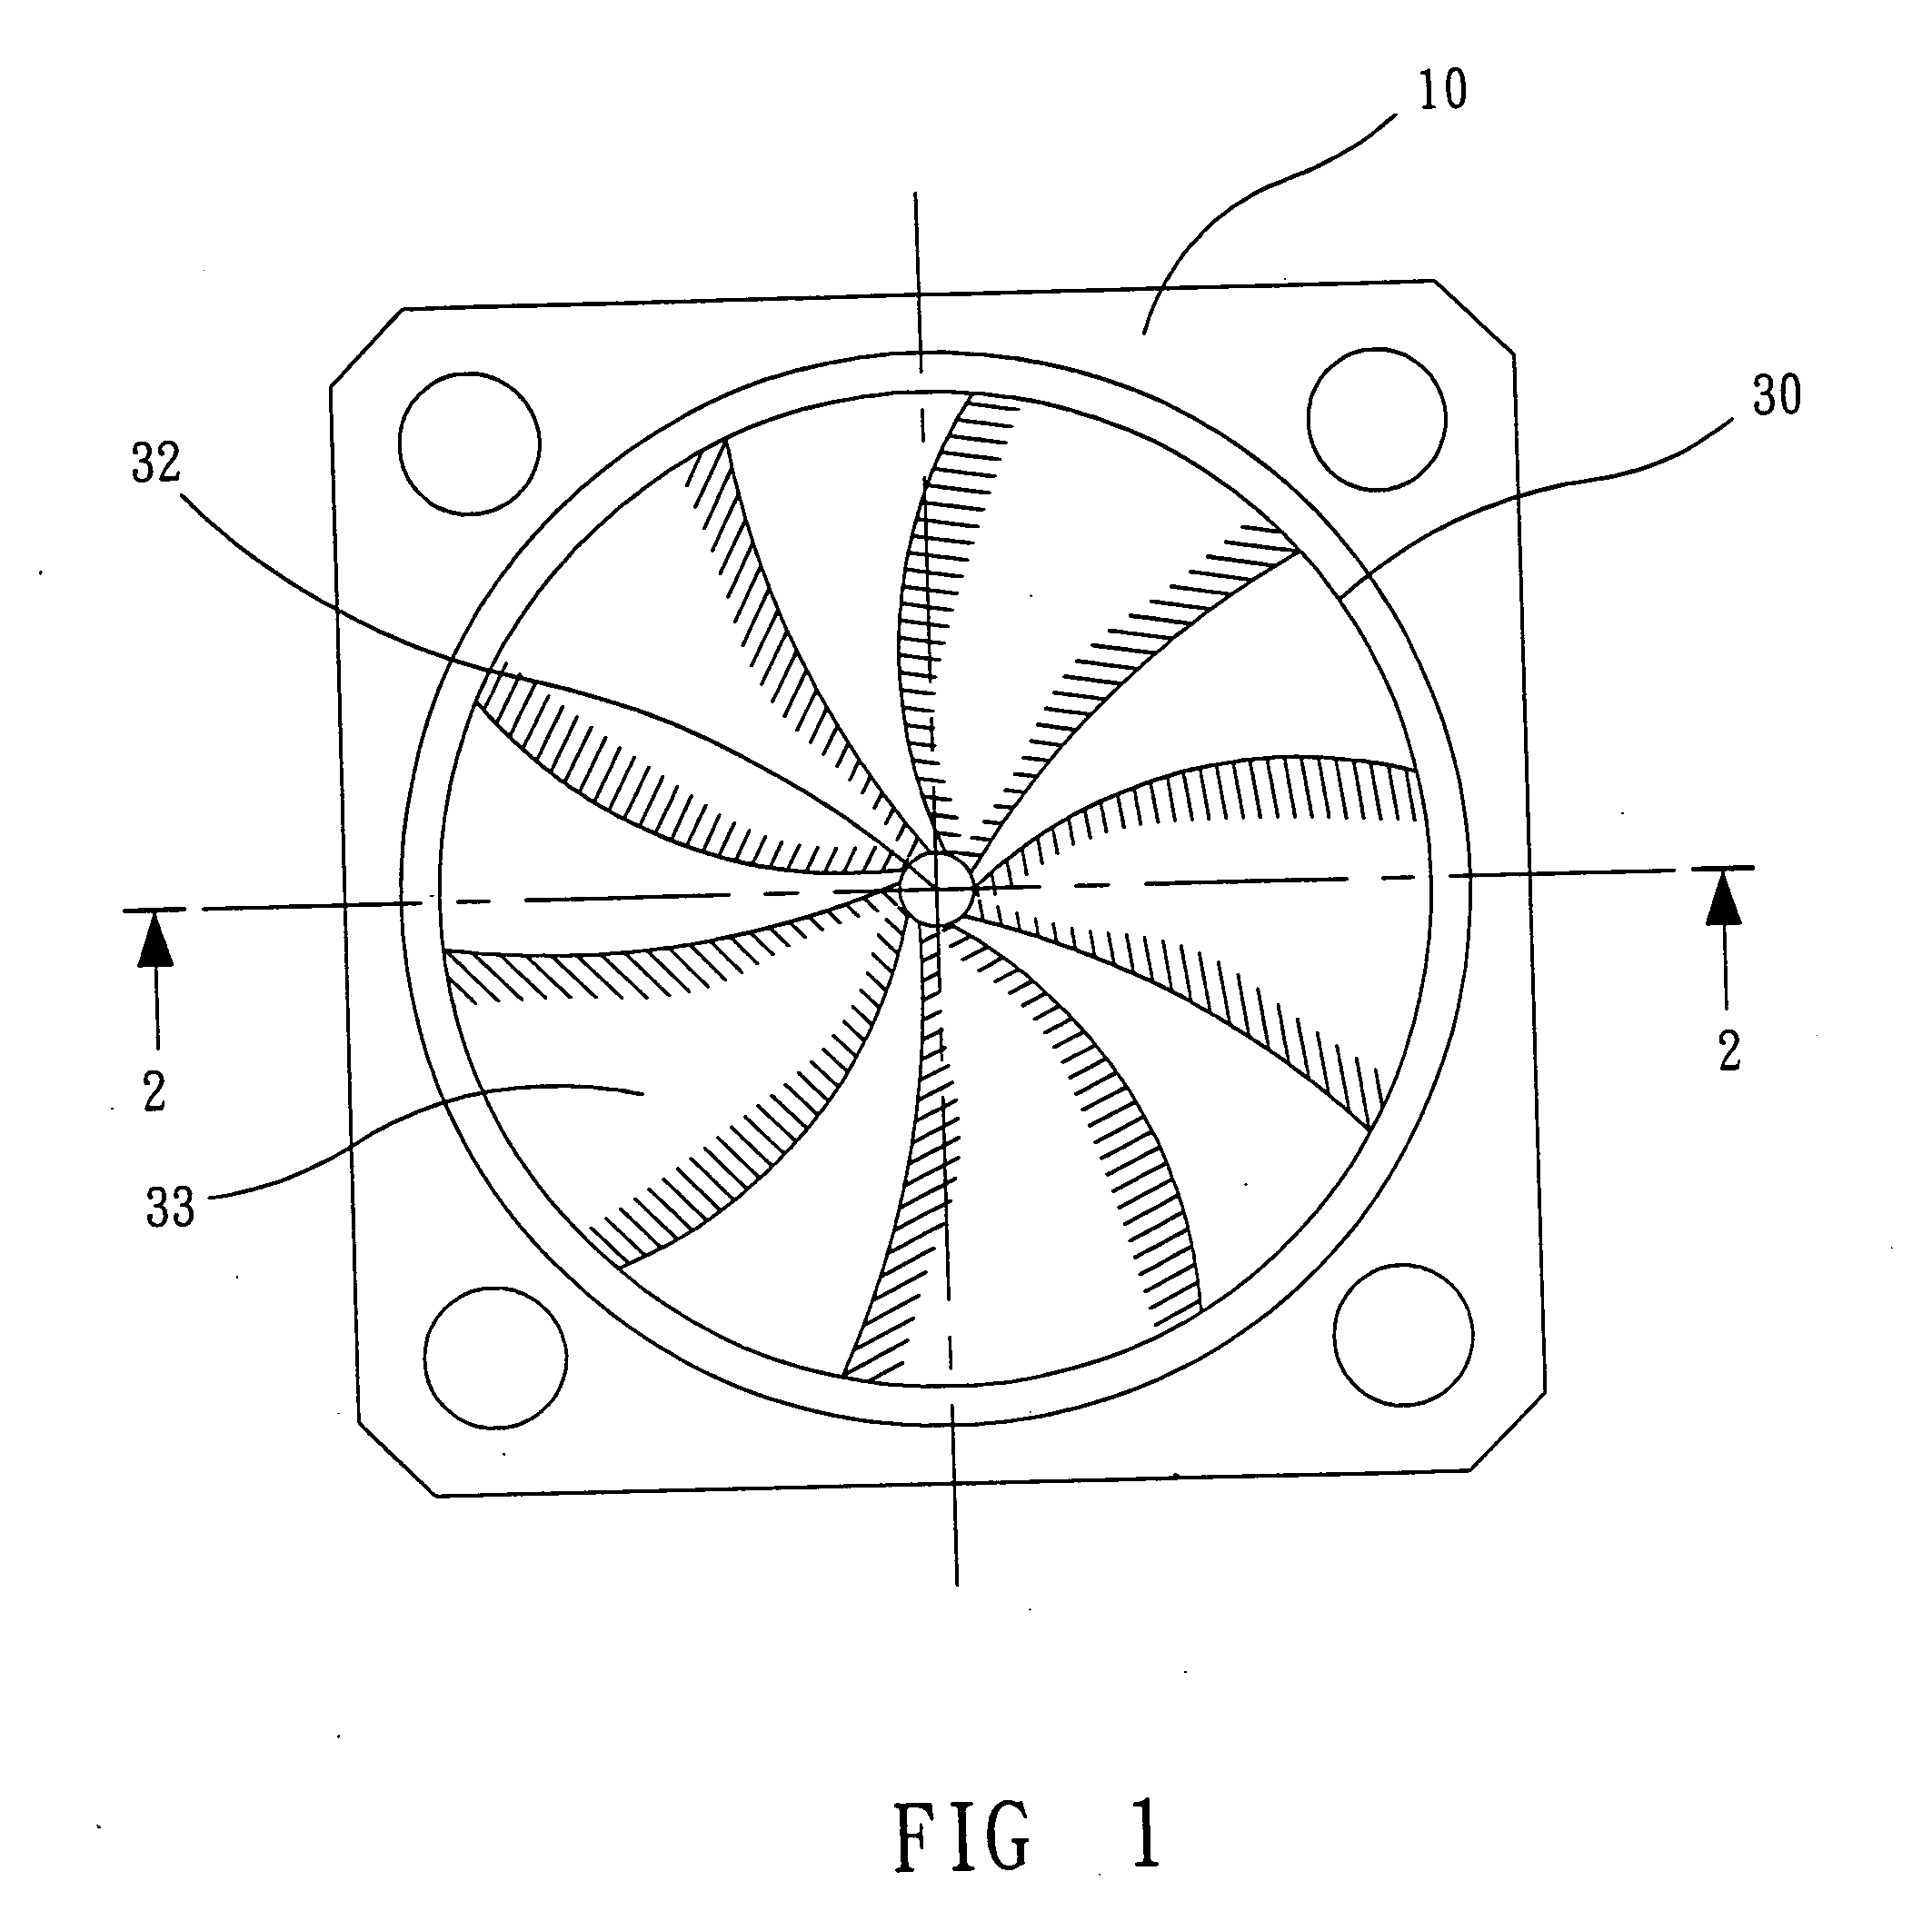 Axial flow type cooling fan with shrouded blades